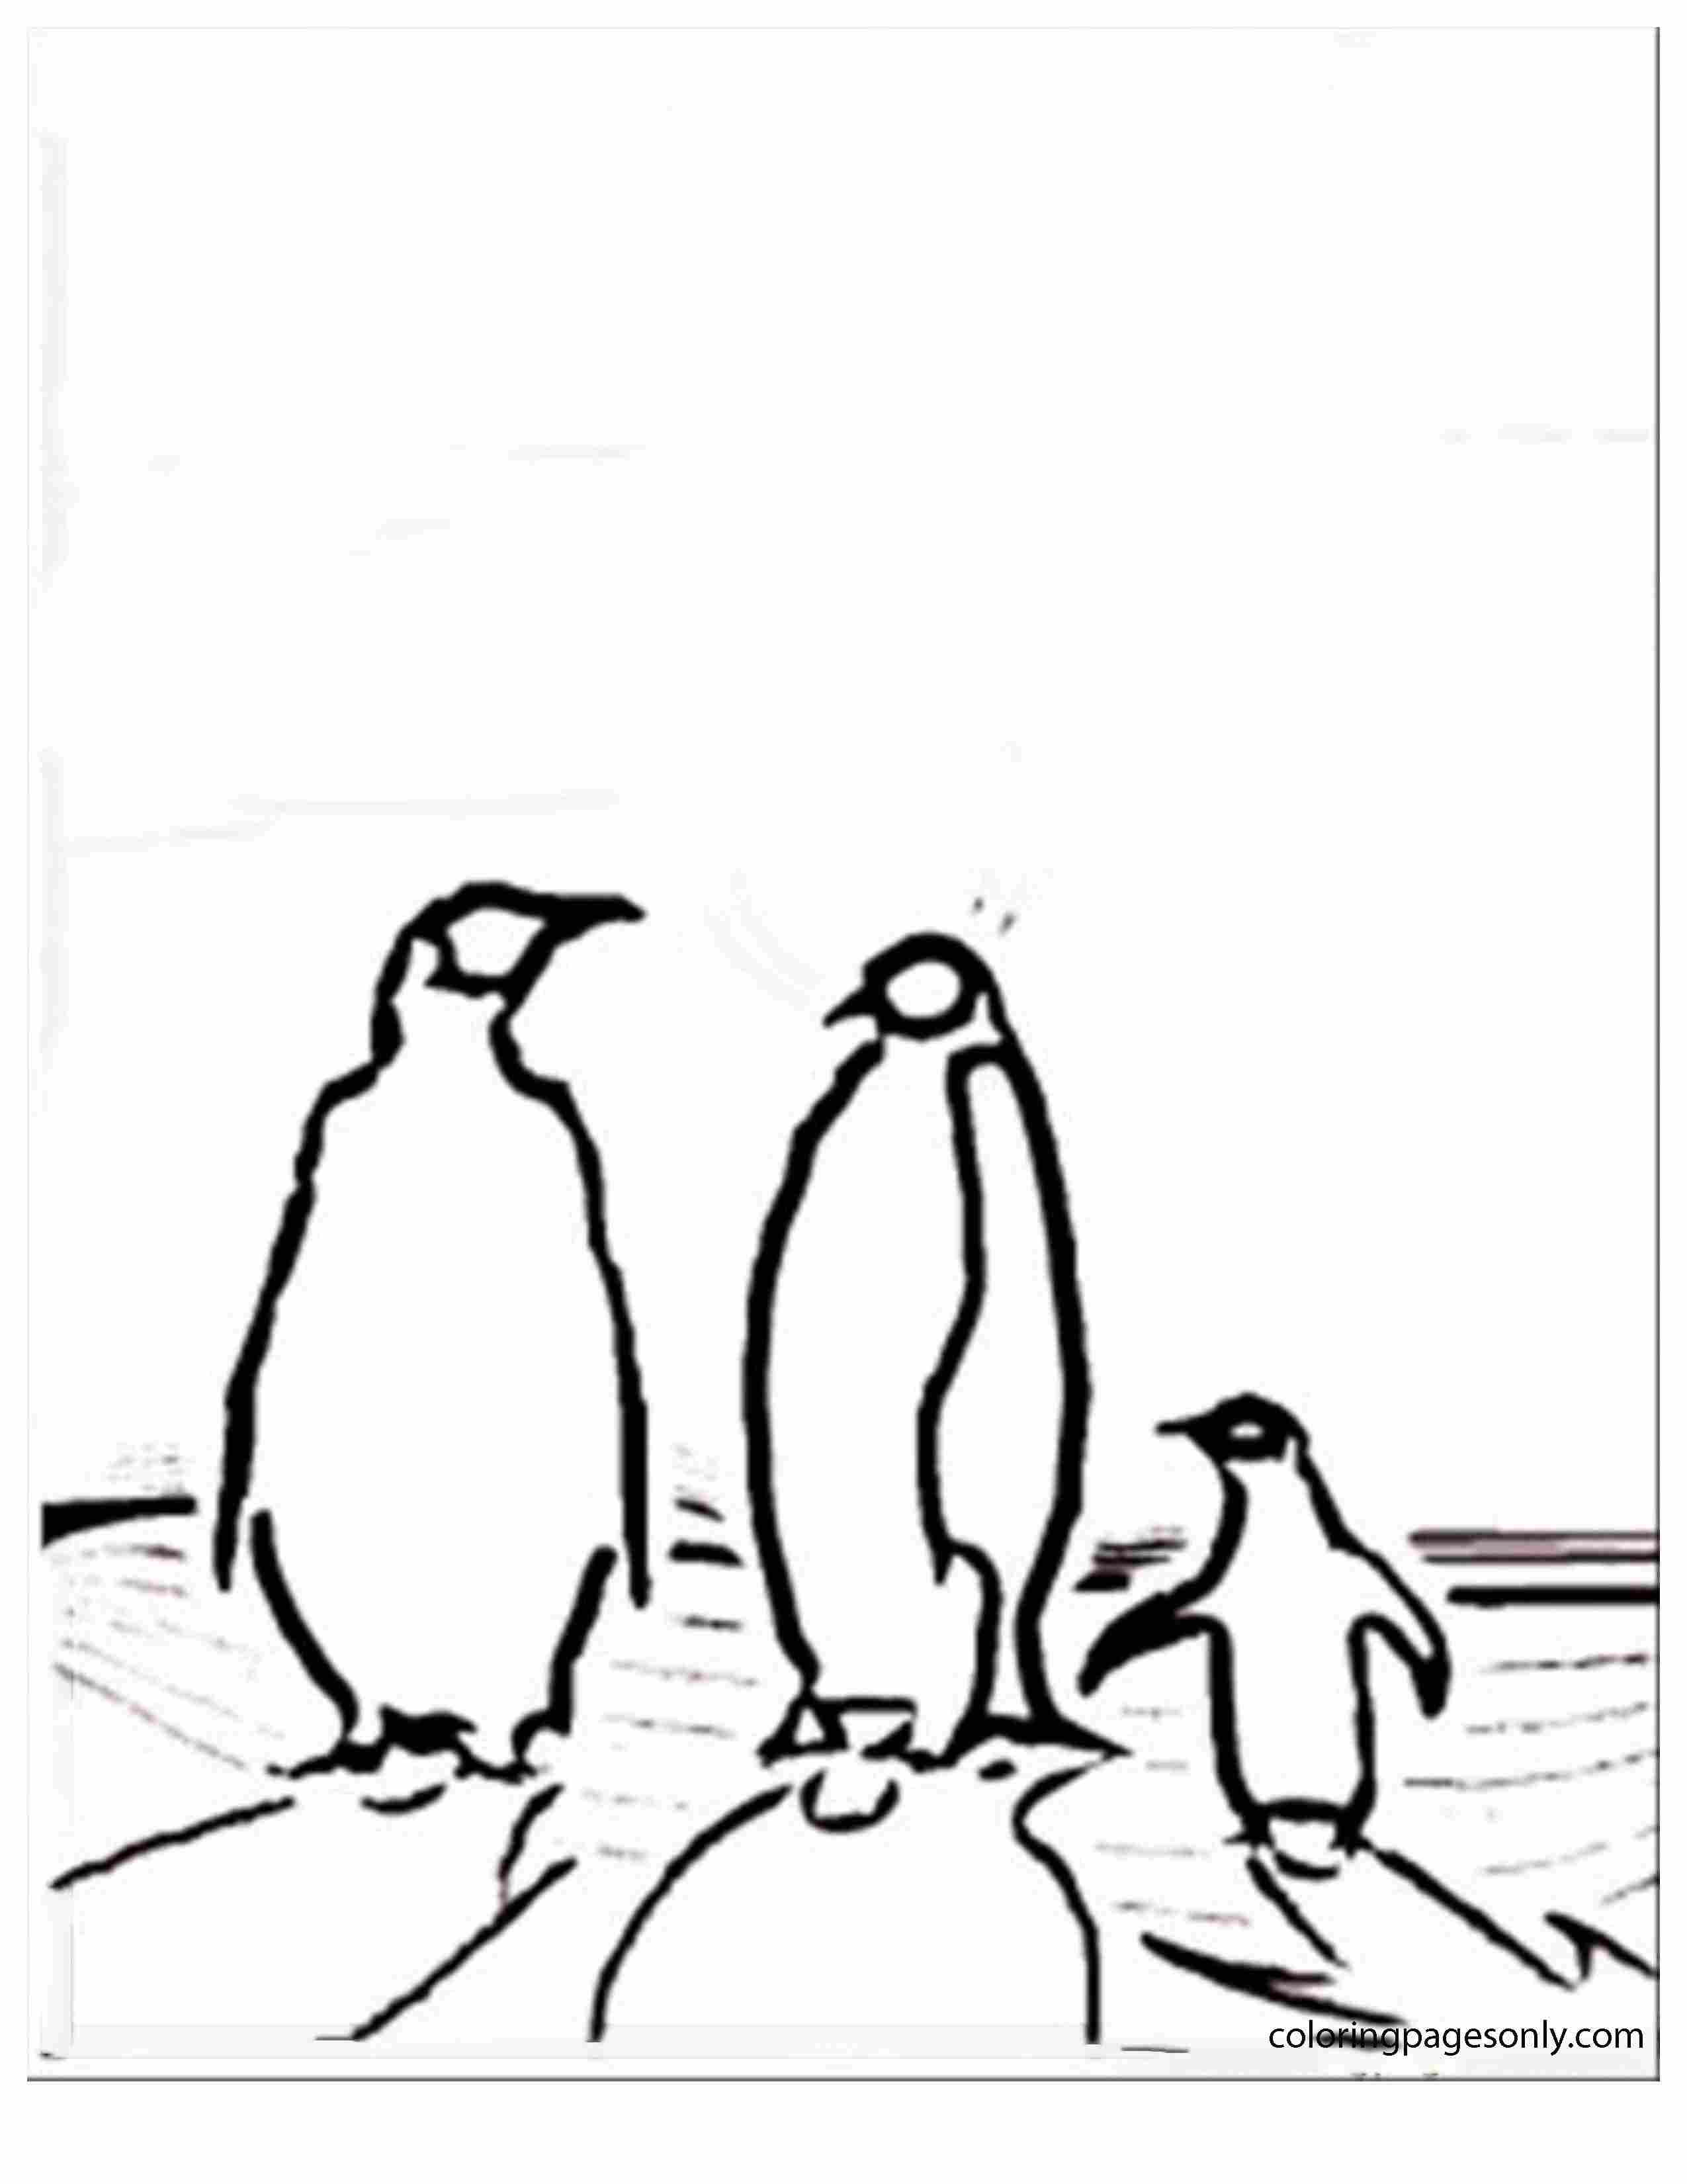 Family of penguins Coloring Pages